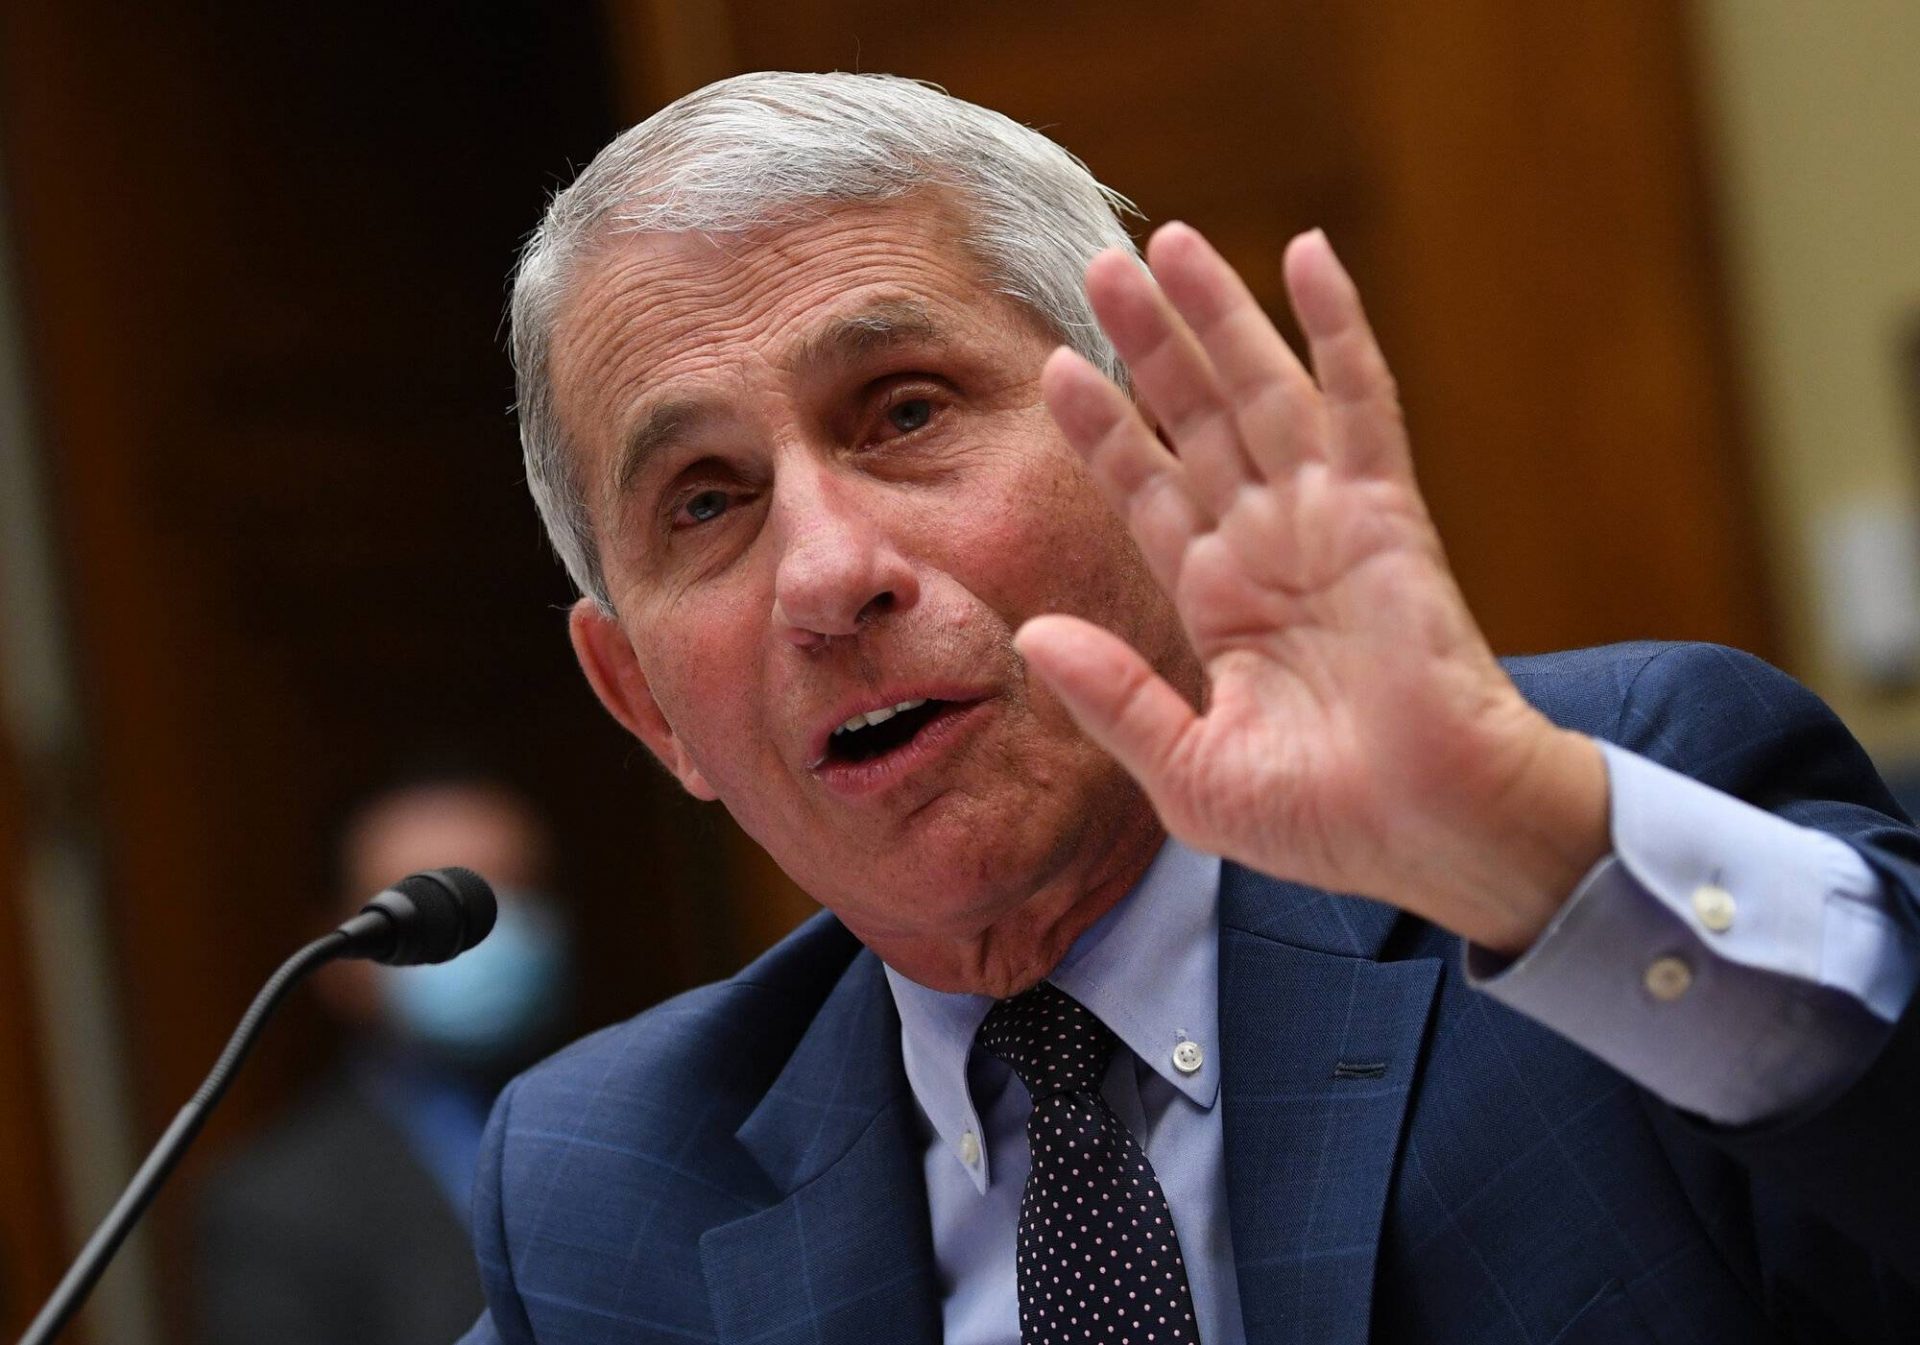 Dr. Fauci unearths the one ingredient he won’t attain even after his coronavirus vaccine